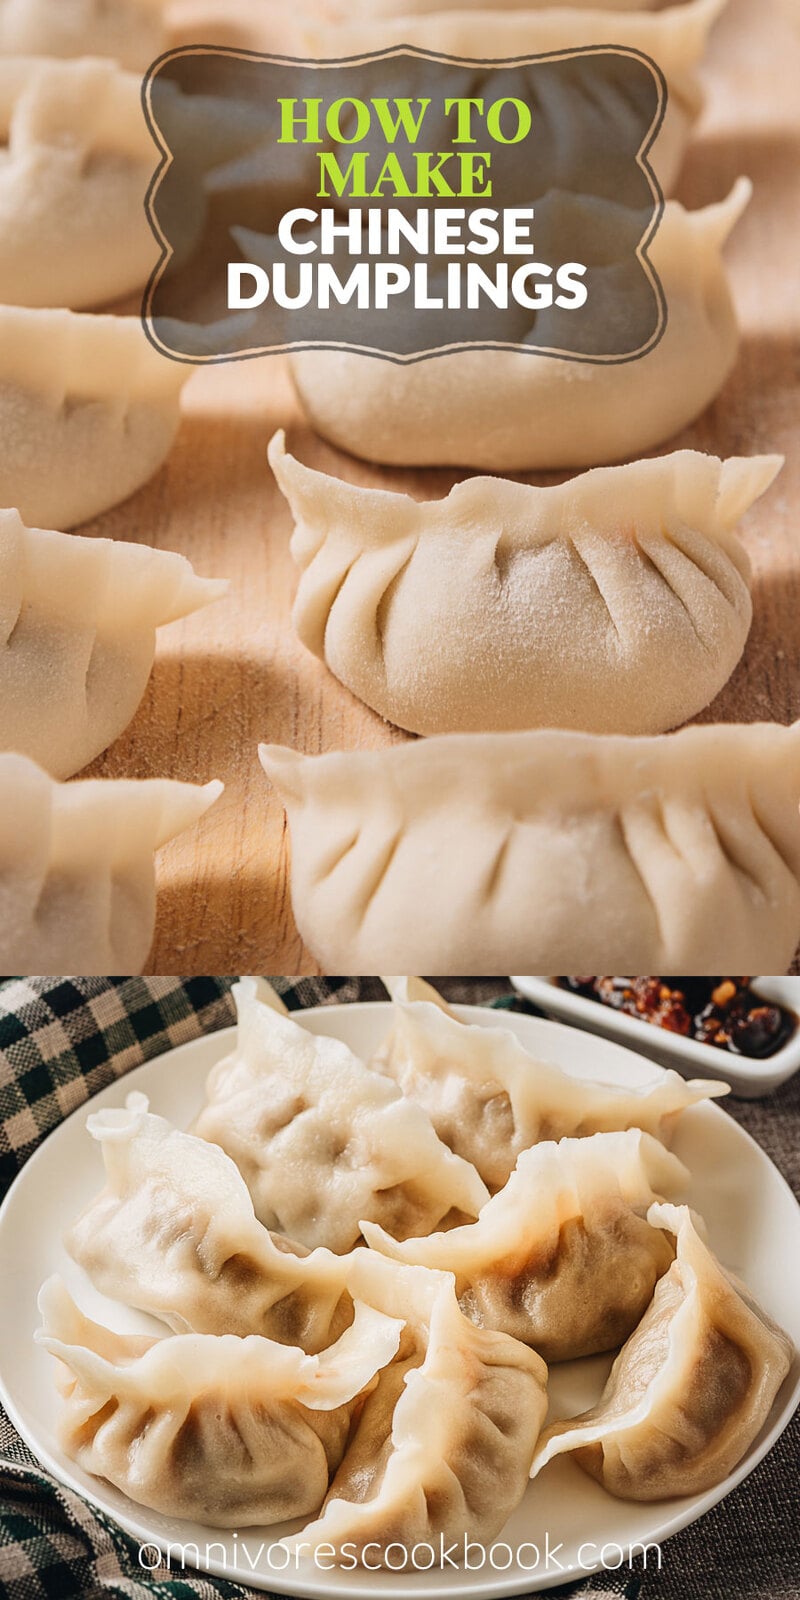 Chinese Dumplings | The ultimate guide to making Chinese dumplings from scratch. The dough can be used for both boiled dumplings (shui jiao, 水饺) and potstickers (guo tie, 锅贴). The dumpling wrappers are tender and thin, with a silky mouthfeel